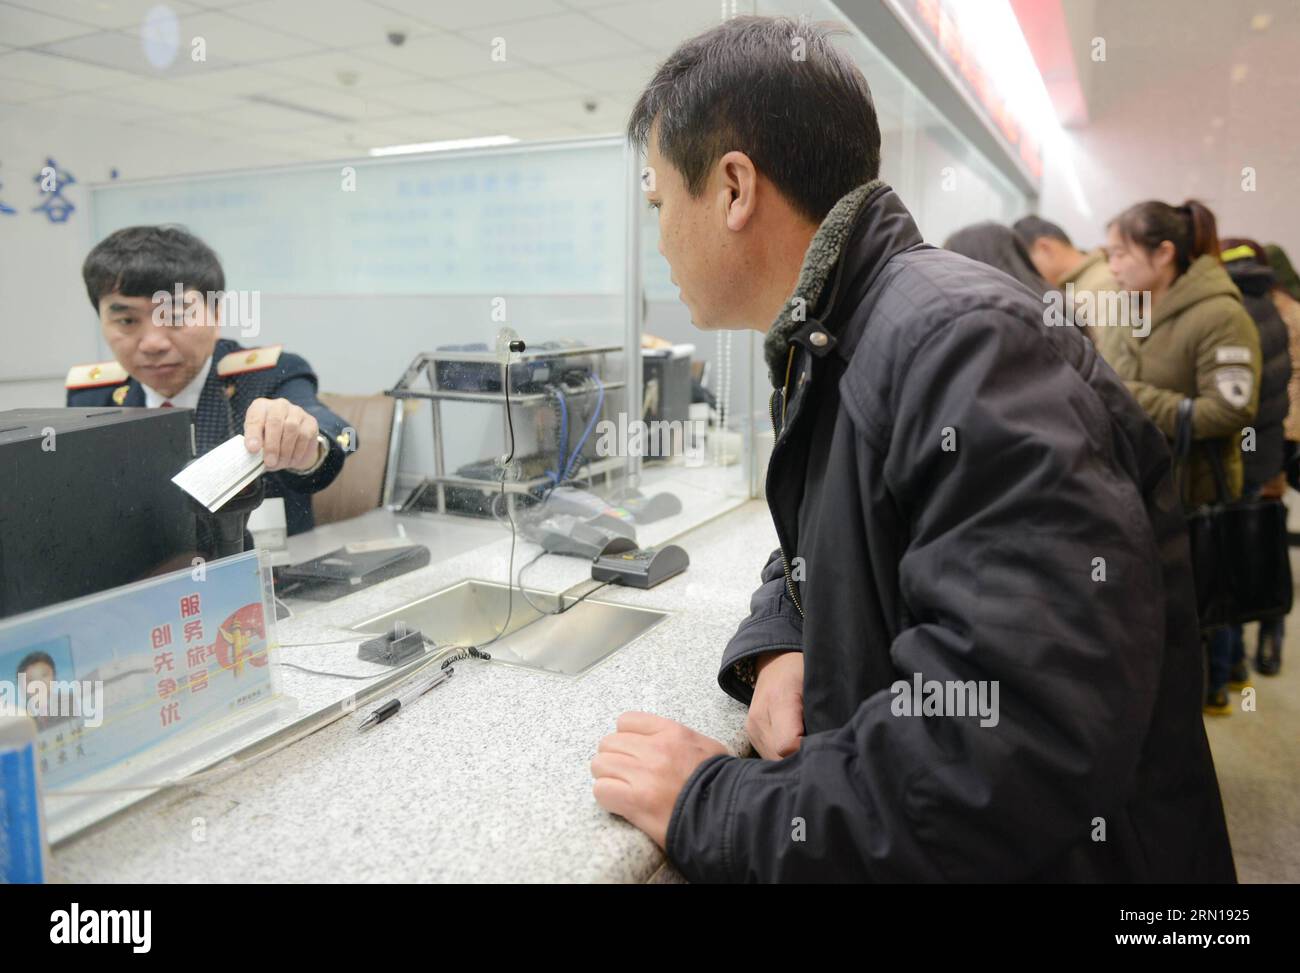 A passenger inquires about tickets at the ticket office of Hohhot Railway Station in Hohhot, north China s Inner Mongolia Autonomous Region, Dec. 7, 2014. China Railway Corporation (CRC), operator of China s rail network, started to sell train tickets for the 40-day travel period known as chunyun on Sunday . Chunyun , sometimes called the world s largest human migration, is the hectic travel period surrounding Chinese New Year. This year, chunyun will begin on Feb. 4 and last until March 16. ) (hdt) CHINA-RAILWAY-TICKET (CN) WangxJing PUBLICATIONxNOTxINxCHN   a Passenger Inquirer About Tickets Stock Photo